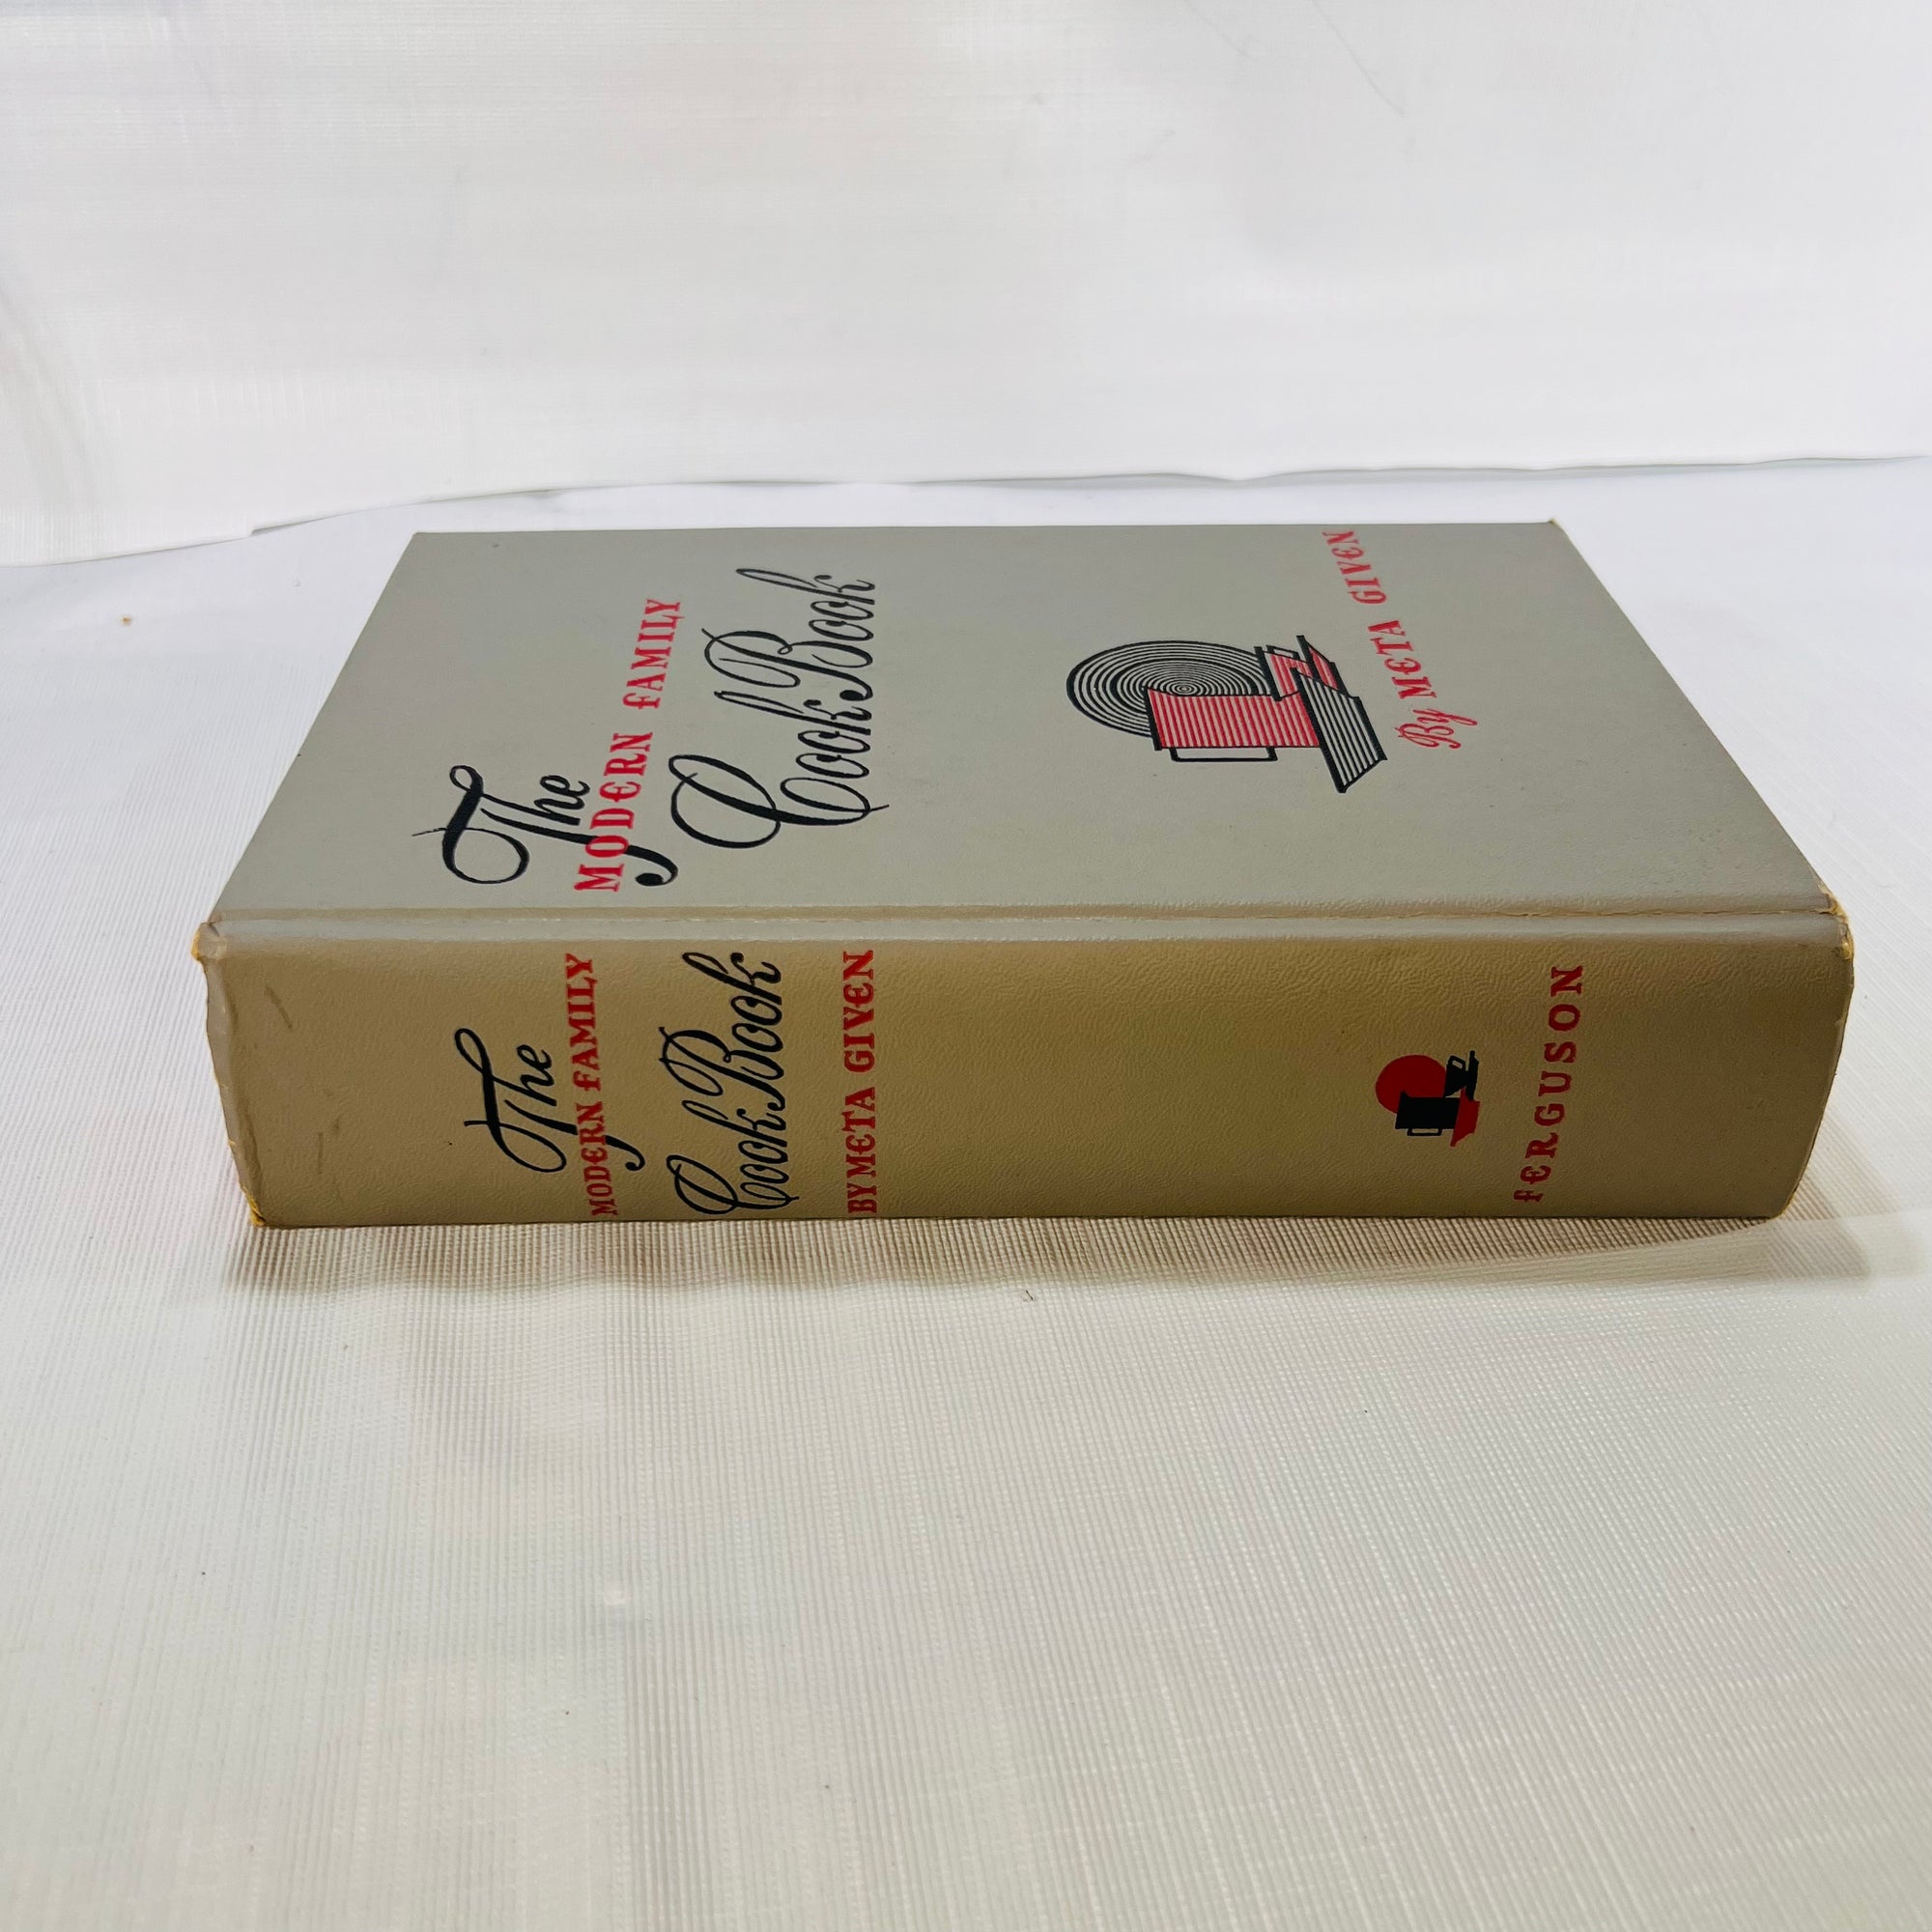 The Modern Family Cook Book by Meta Given 1958 published by J.G. Ferguson & Associates